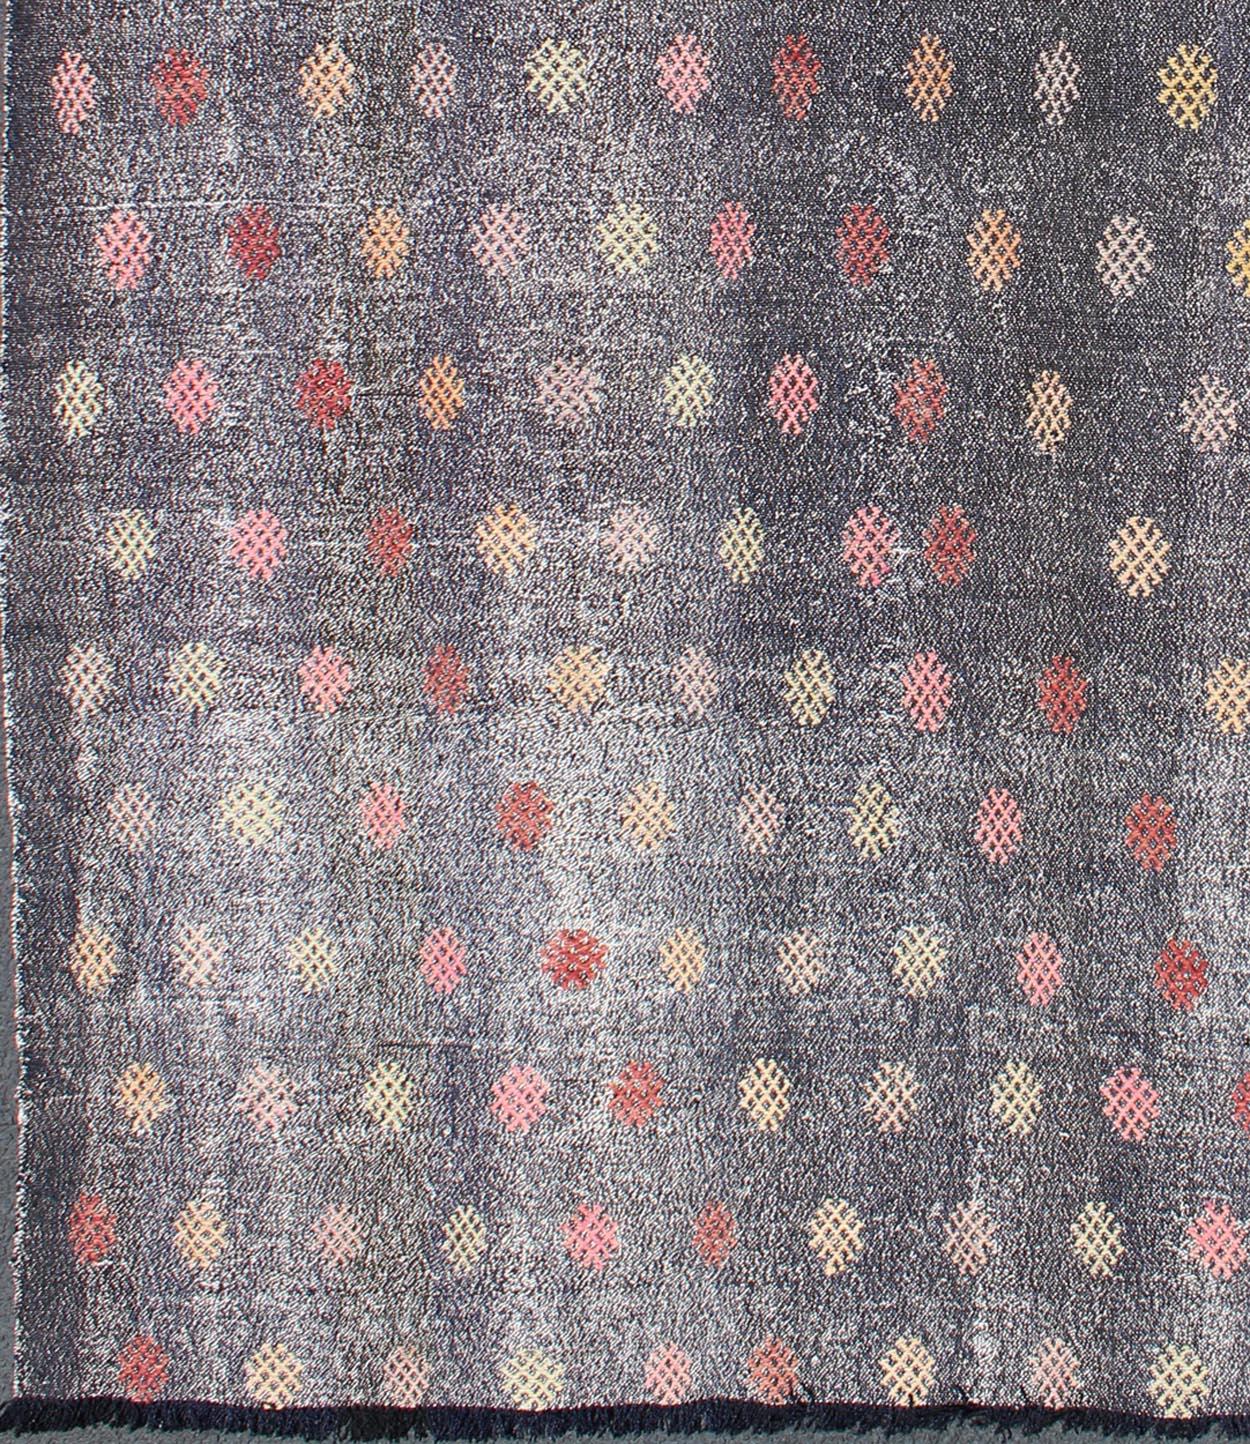 This marvelous geometric kilim with embroidered flowers showcases a modern, all-over repeating pattern, paired with a distinct set of random colors such as pink, grey, green, blue, ivory, red, black, cream and yellow.

Measures: 6'6'' x